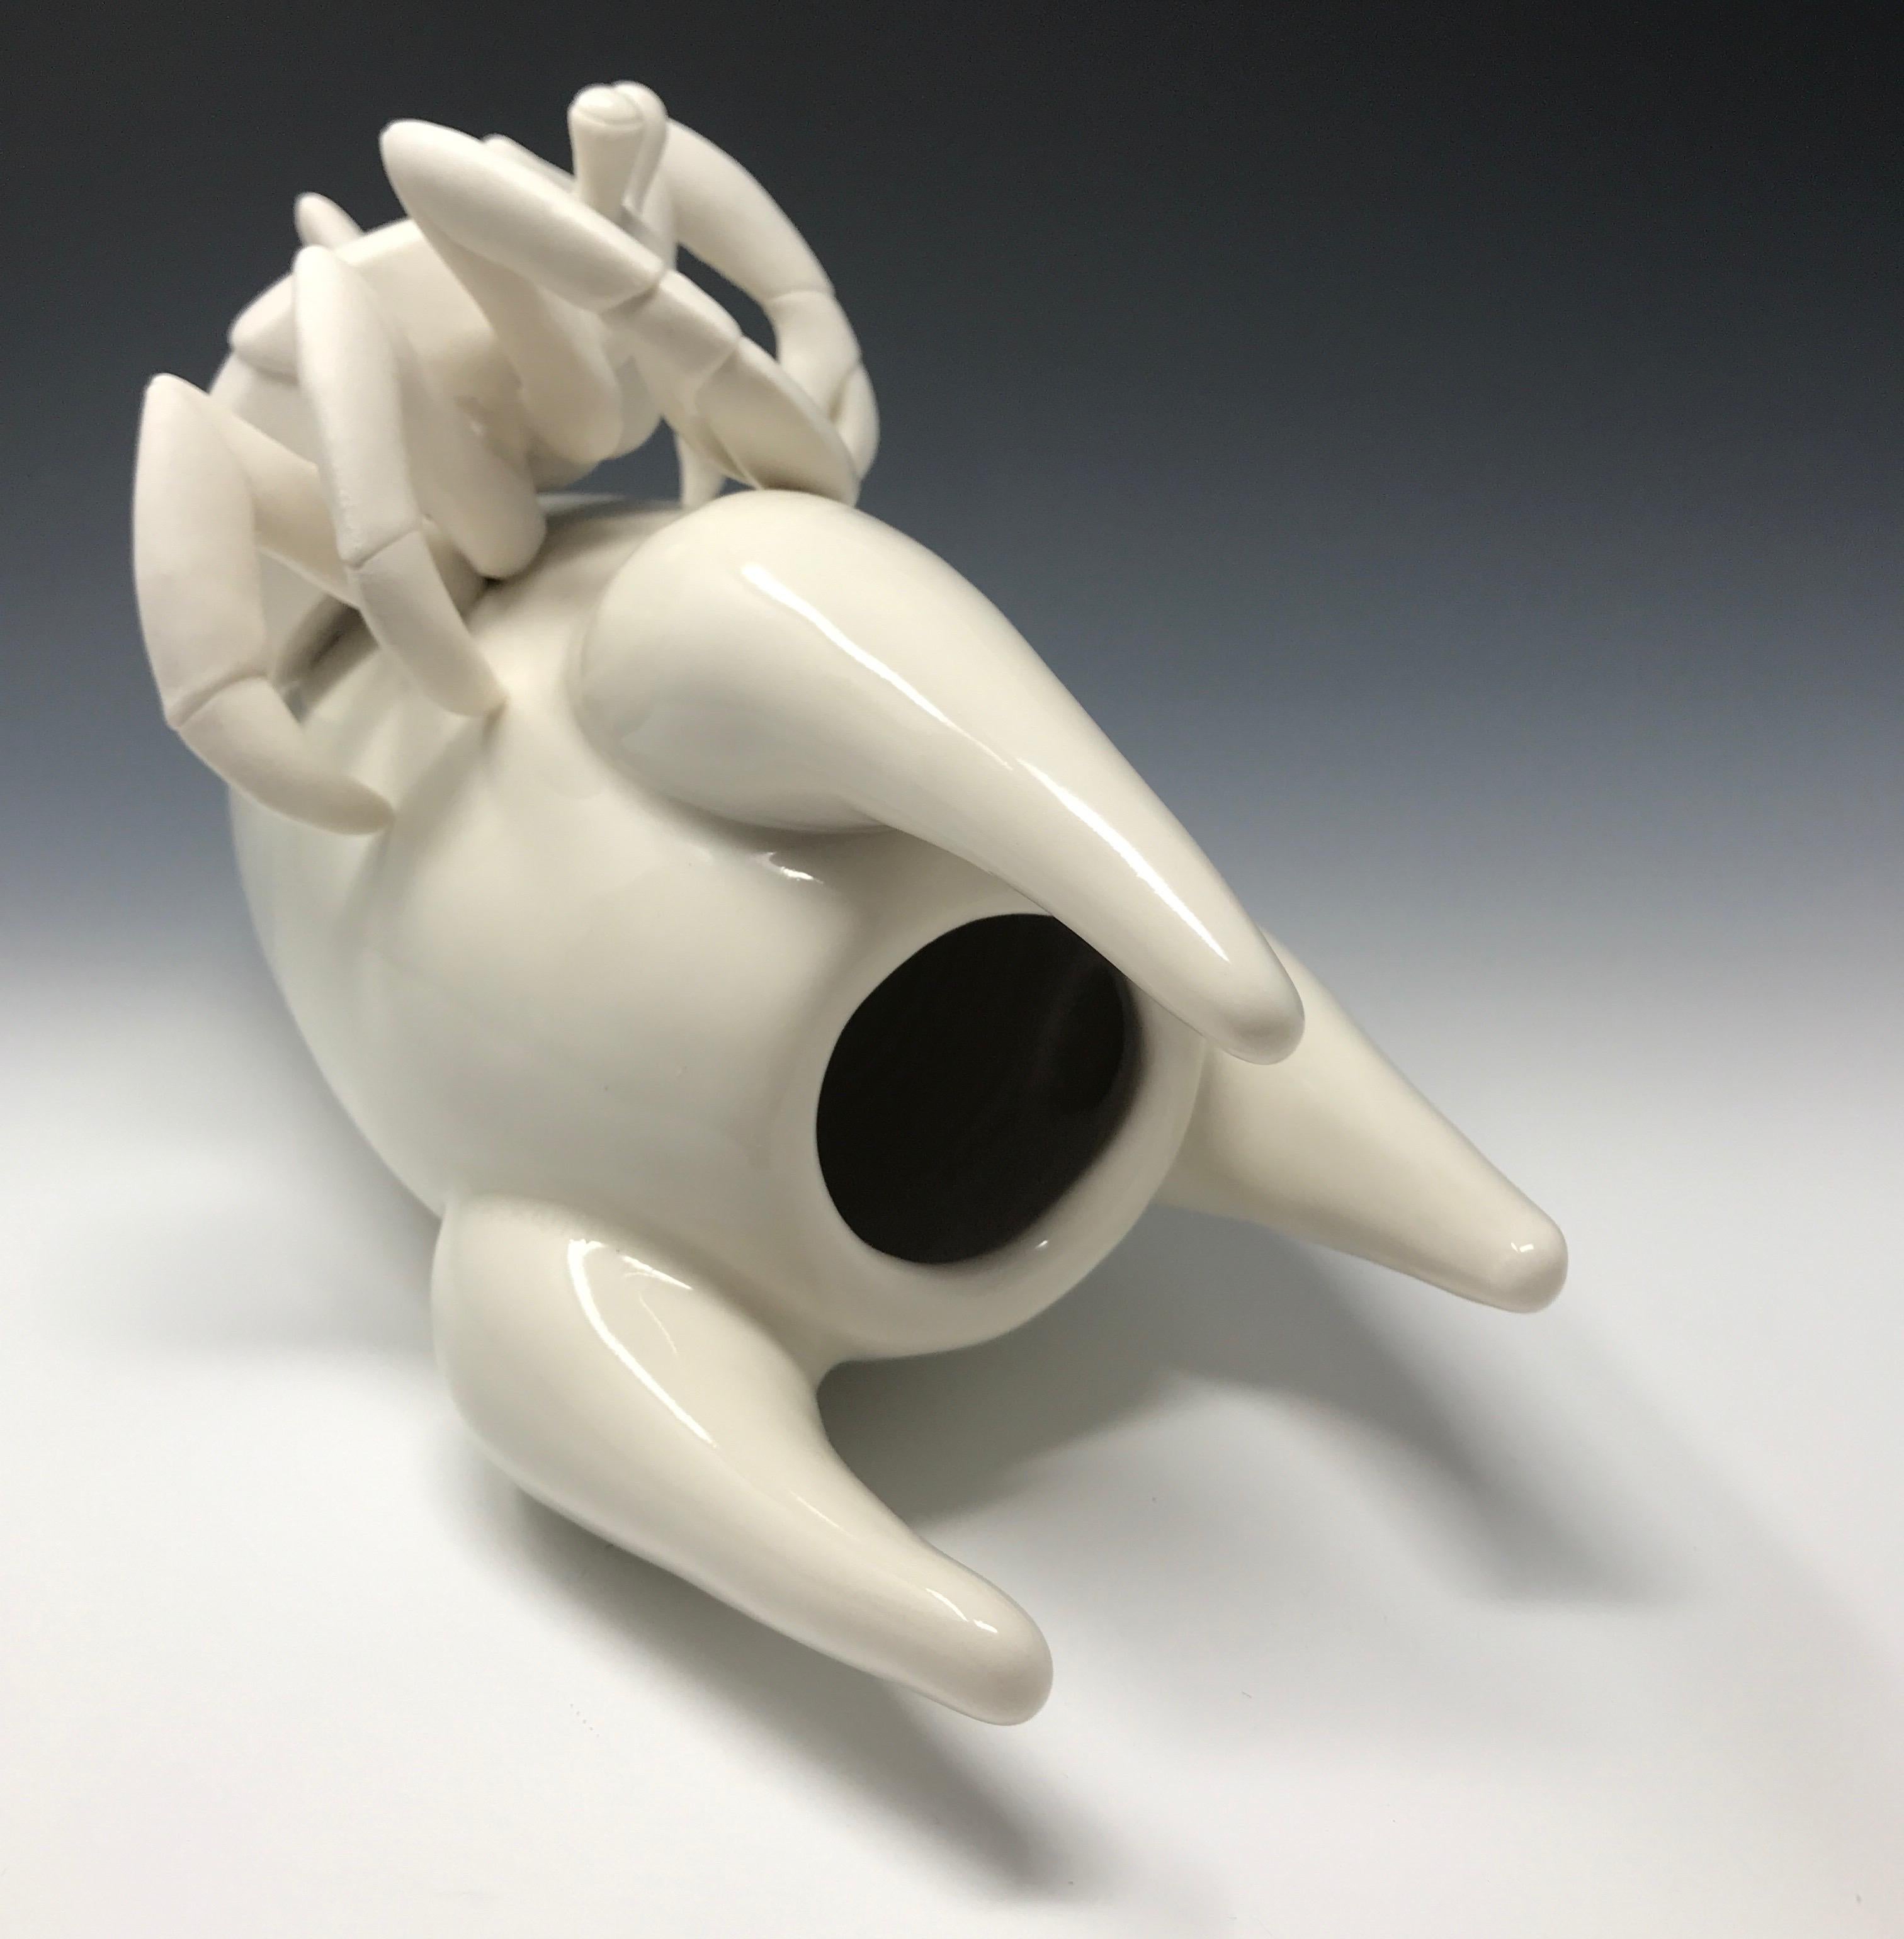 Porcelain hermit crab on a toy rocket “Starter Pet Adaptation” by Bethany Krull 1